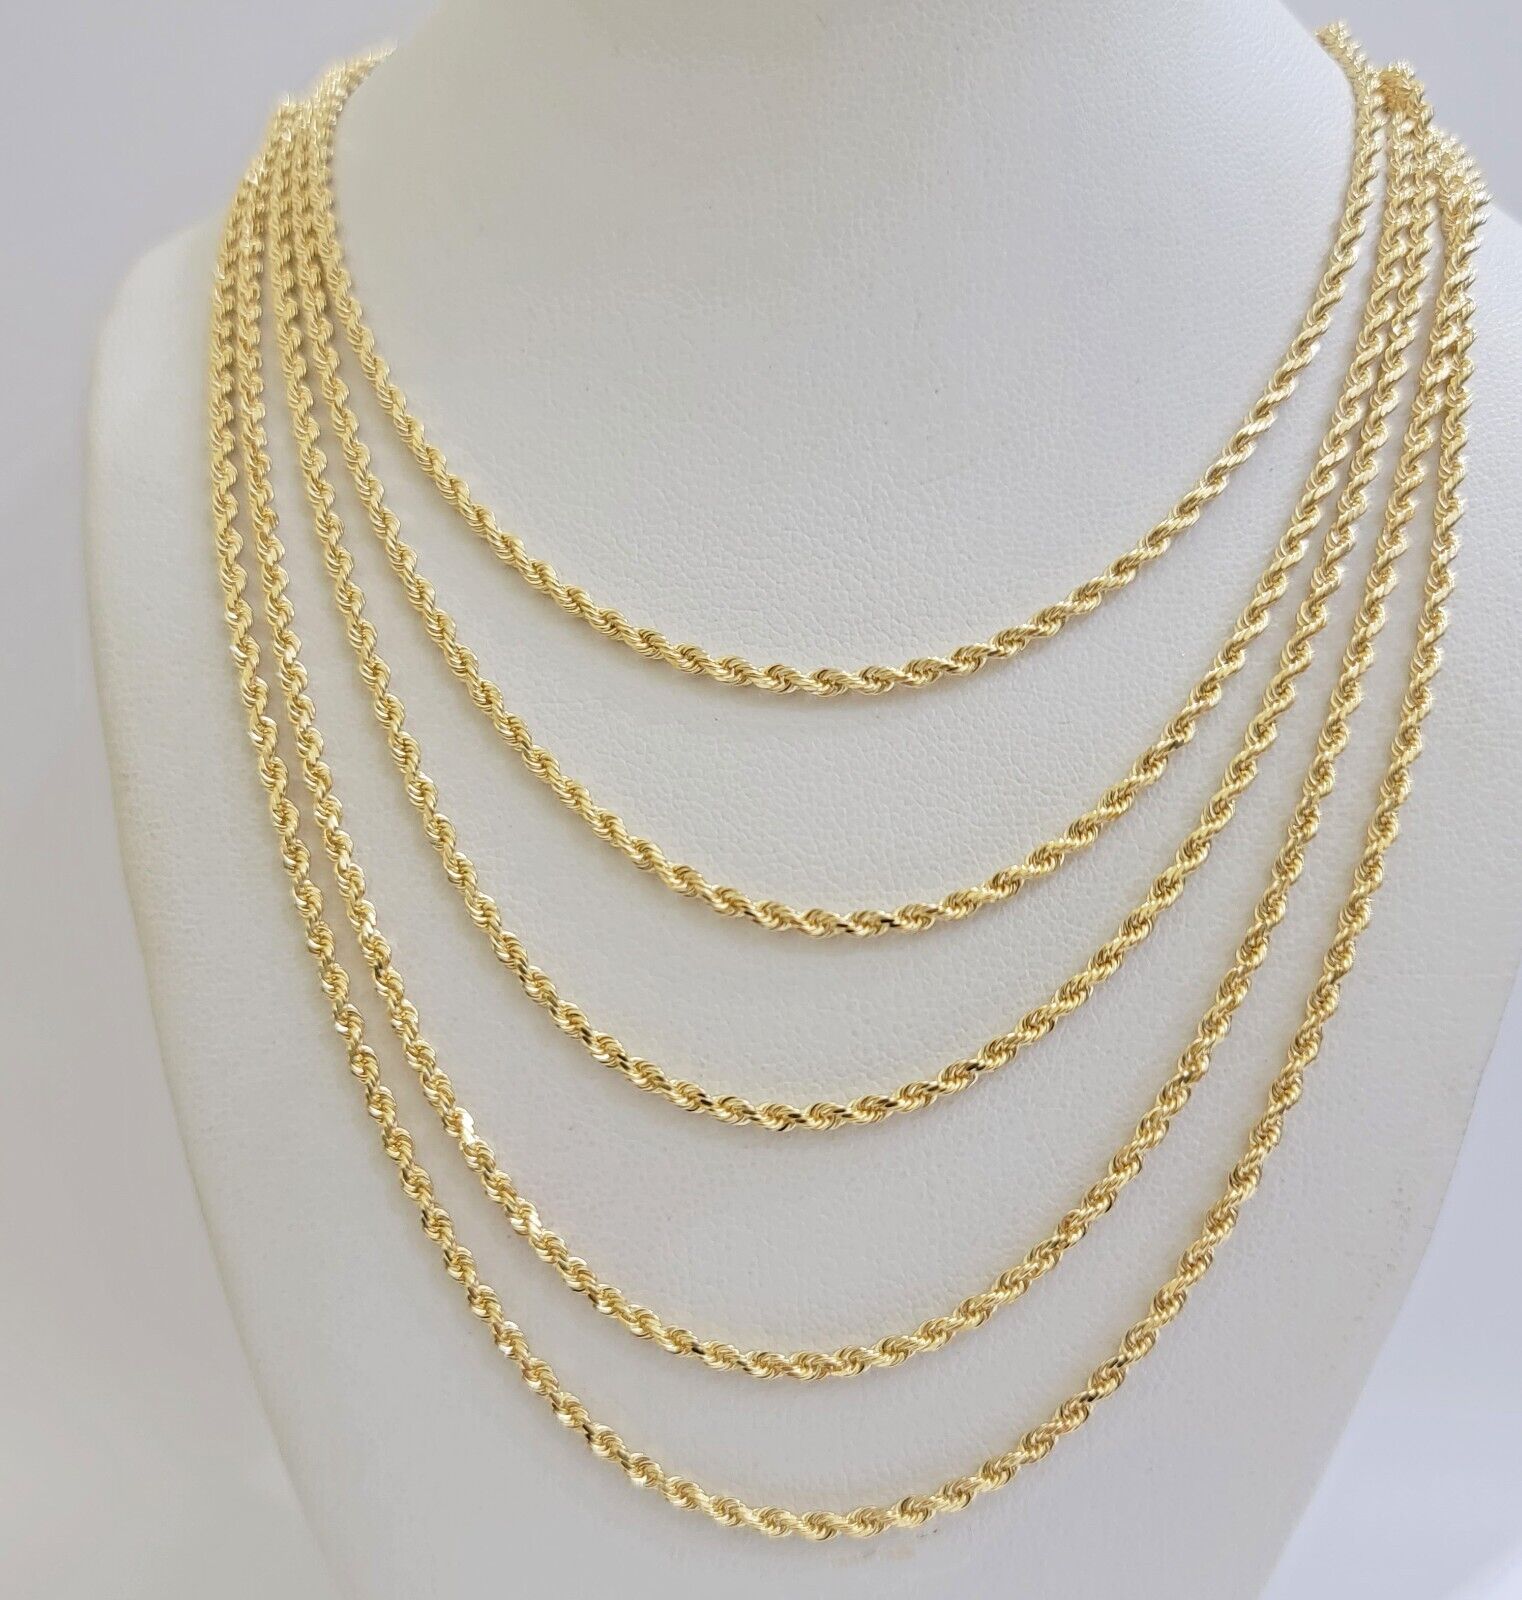 Real 18k Yellow Gold Rope Chain Necklace 24 Inch 2mm Solid 18 KT Men Women, SALE